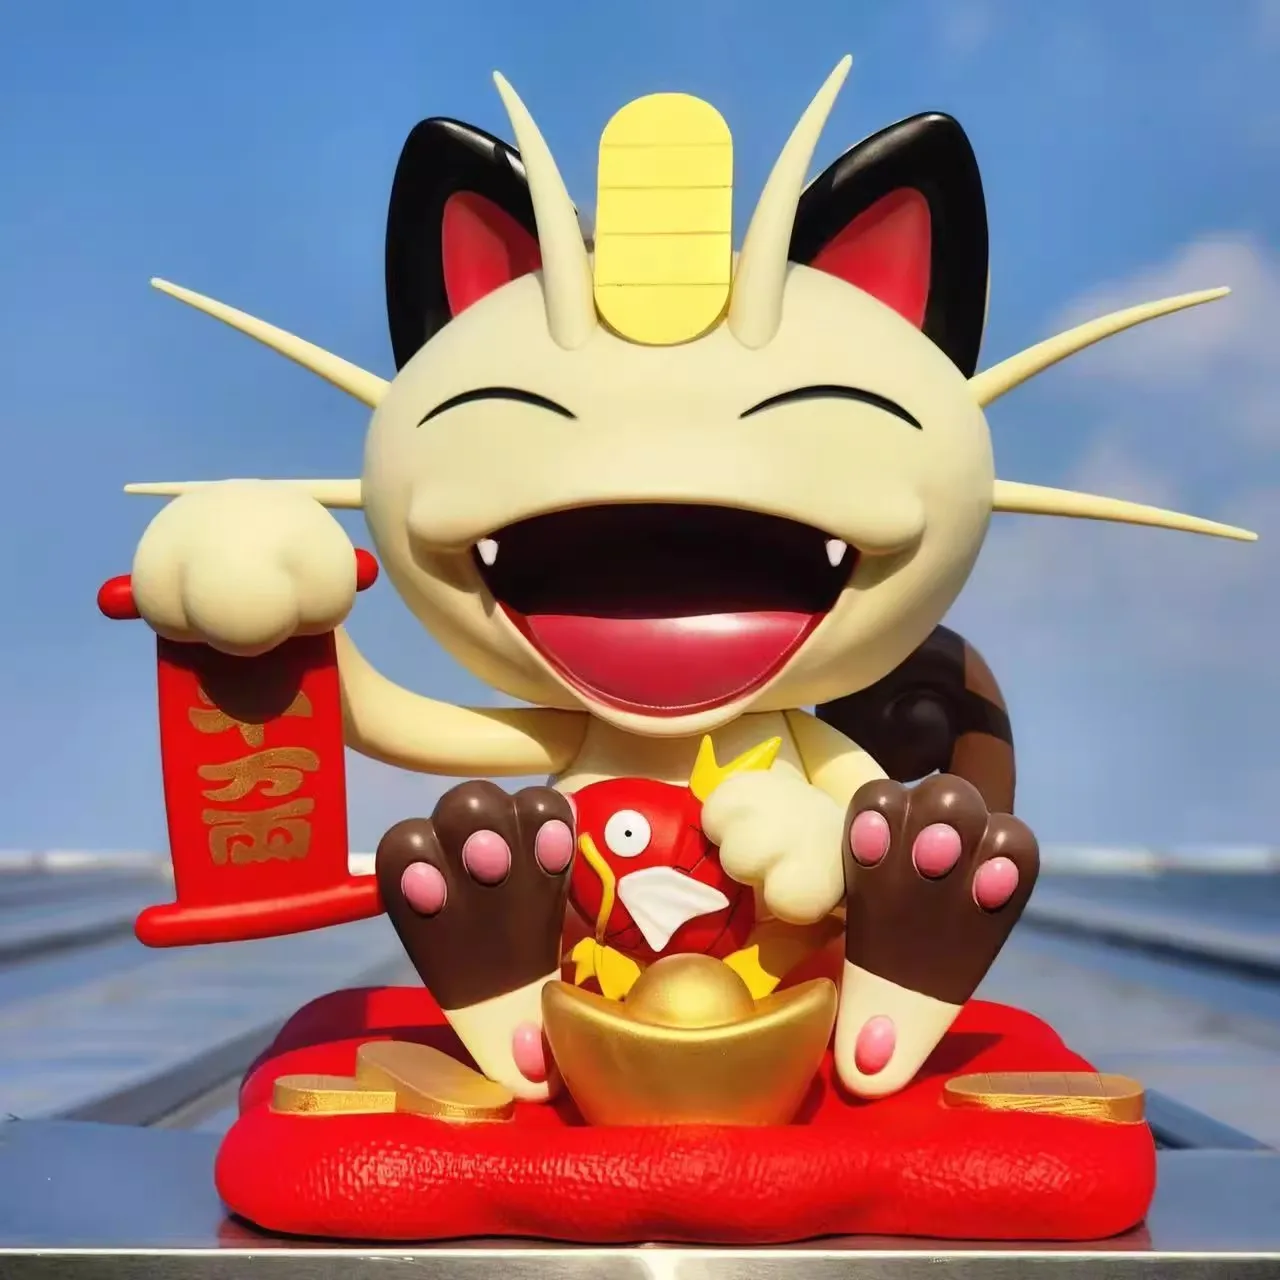 

35cm Gk Meow Monster Pokemon Lucky Exquisite Collection Of Figures Pokemon Super Huge Model Statue Lucky Cat Festive Ornaments